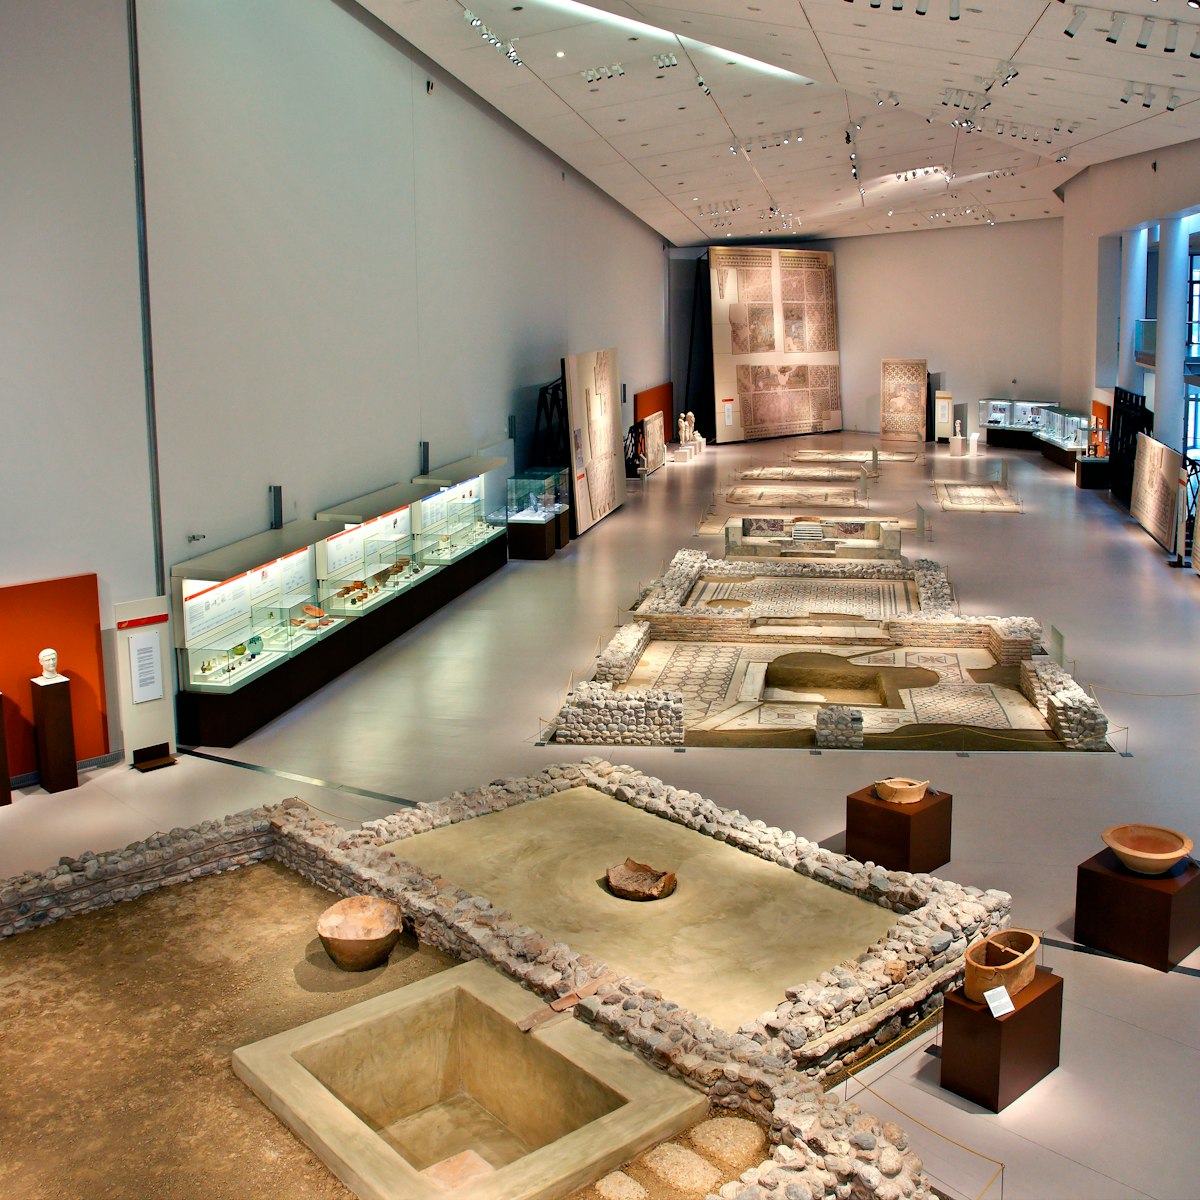 The archaeological museum of Patras.